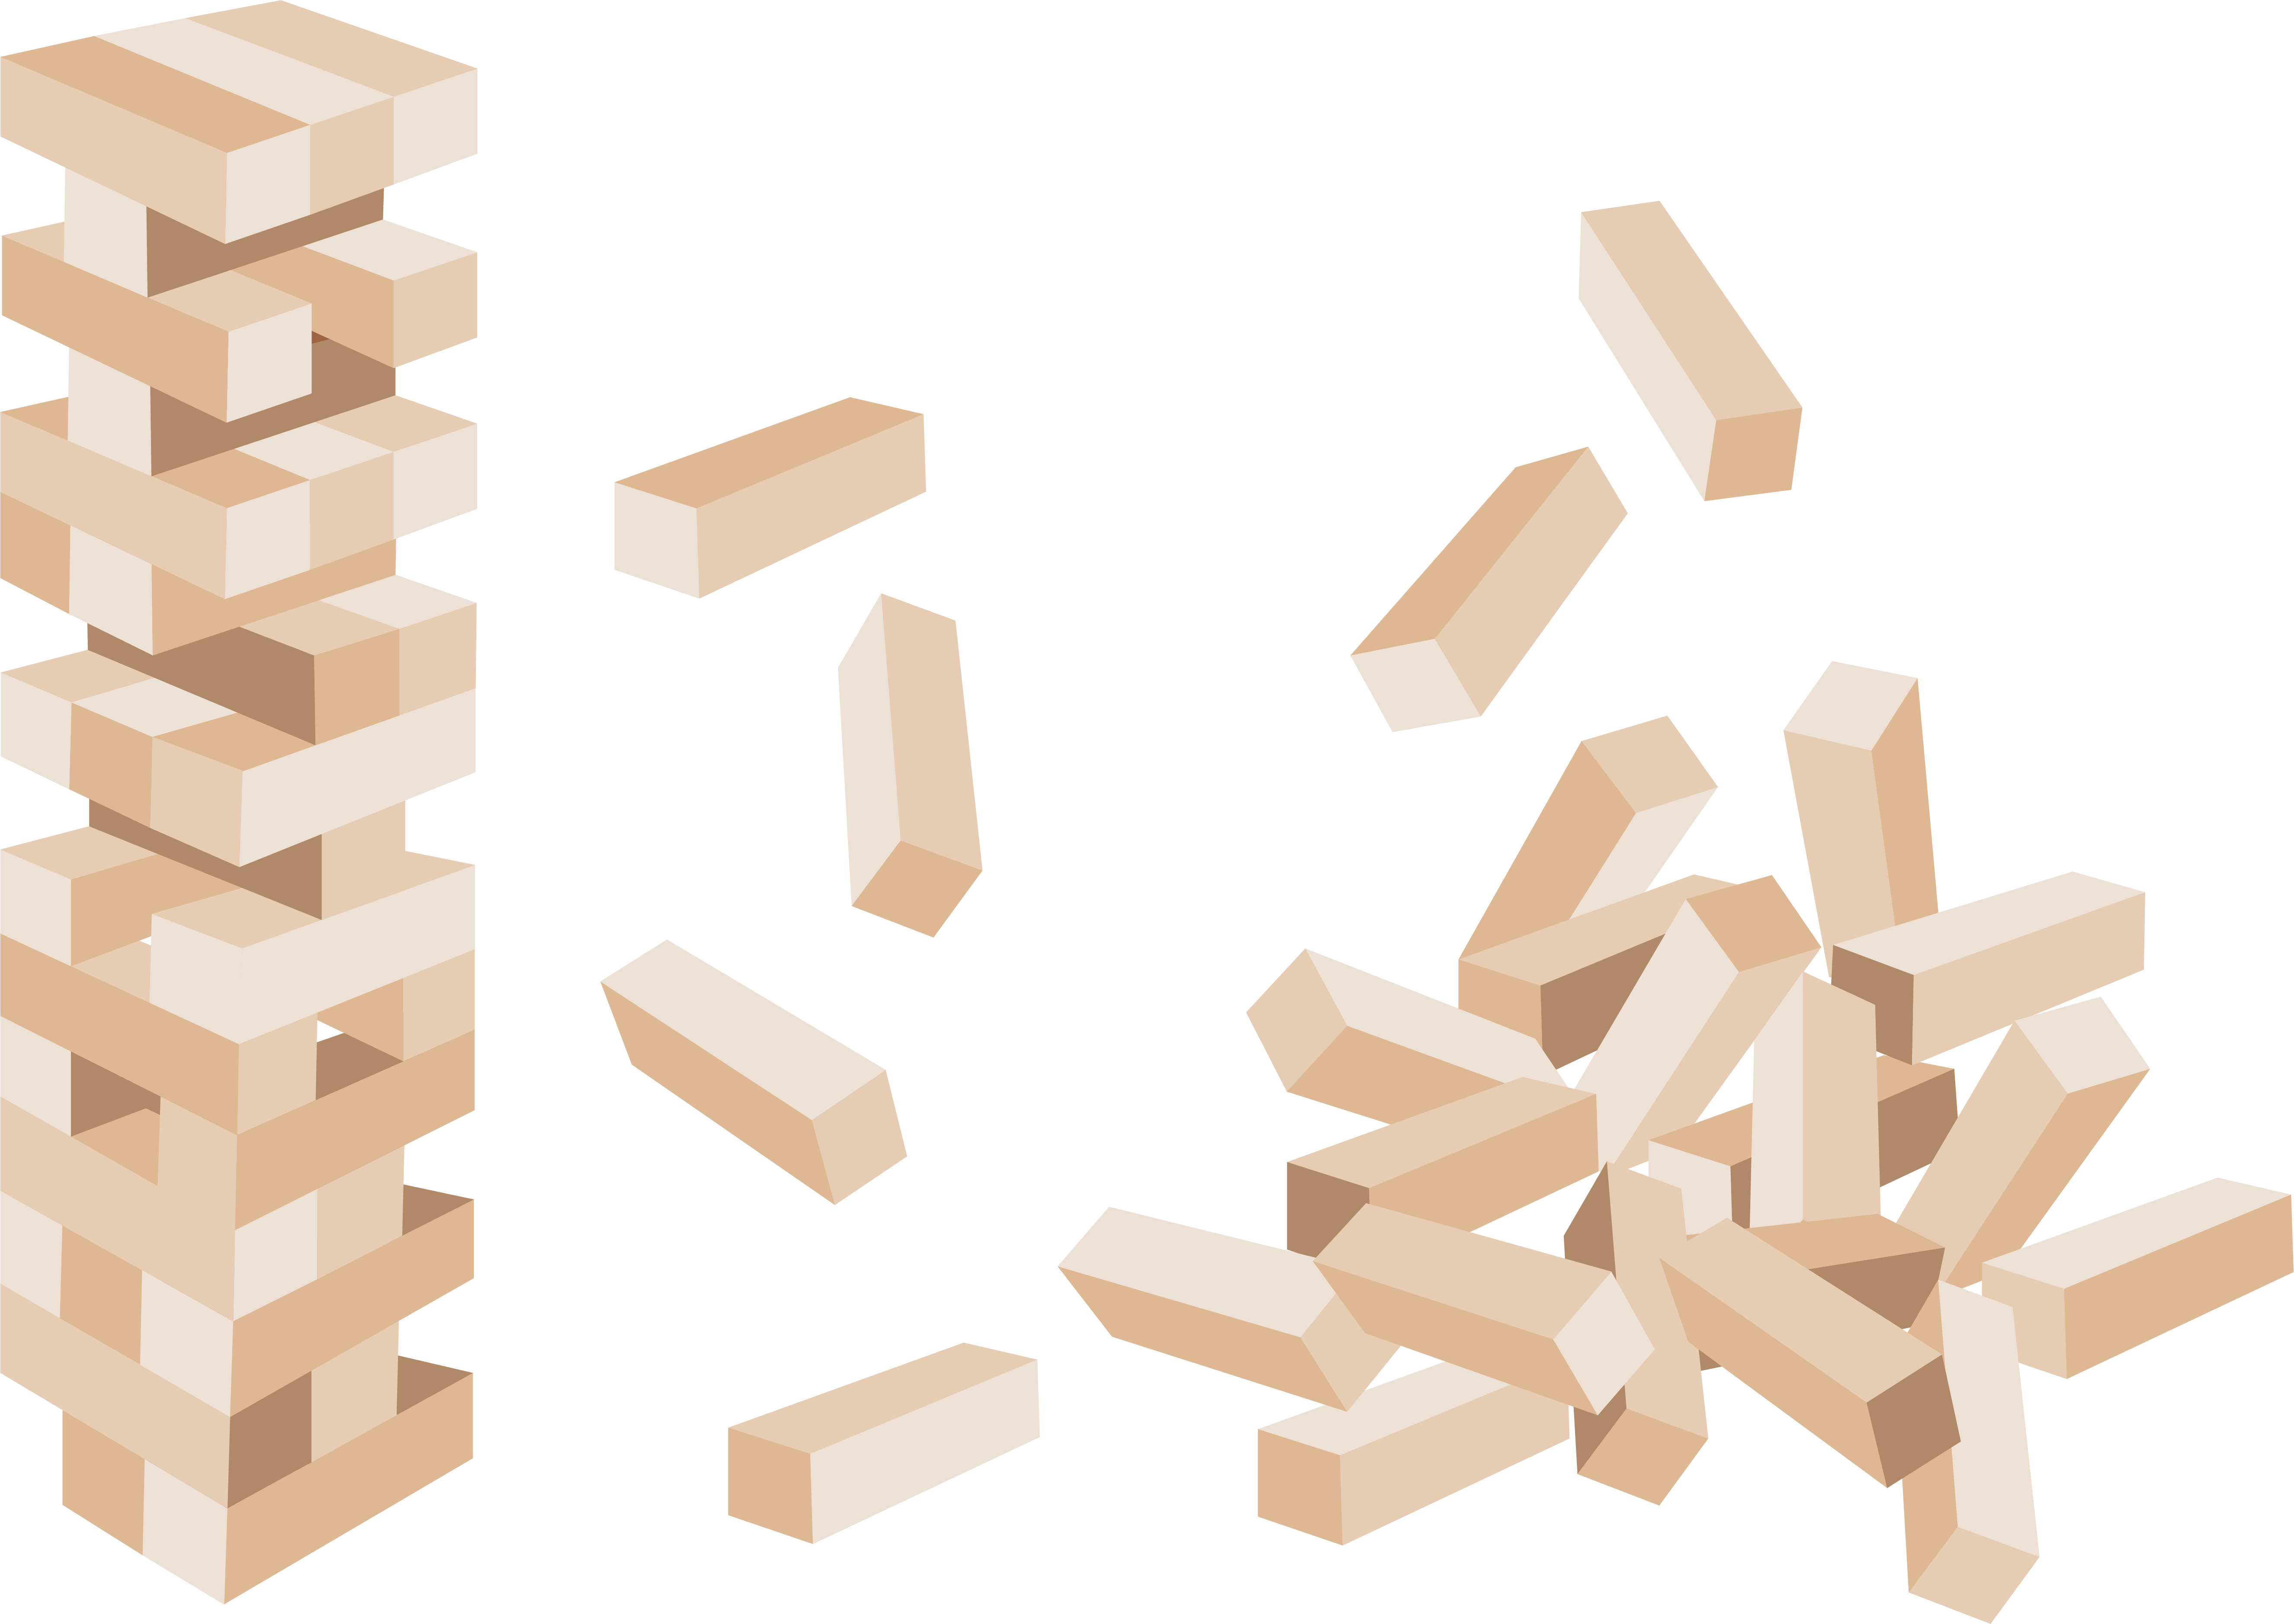 Reputation is like the game Jenga. One wrong move and it all falls apart. It's hard and time consuming to build it up, but easy to lose it all.